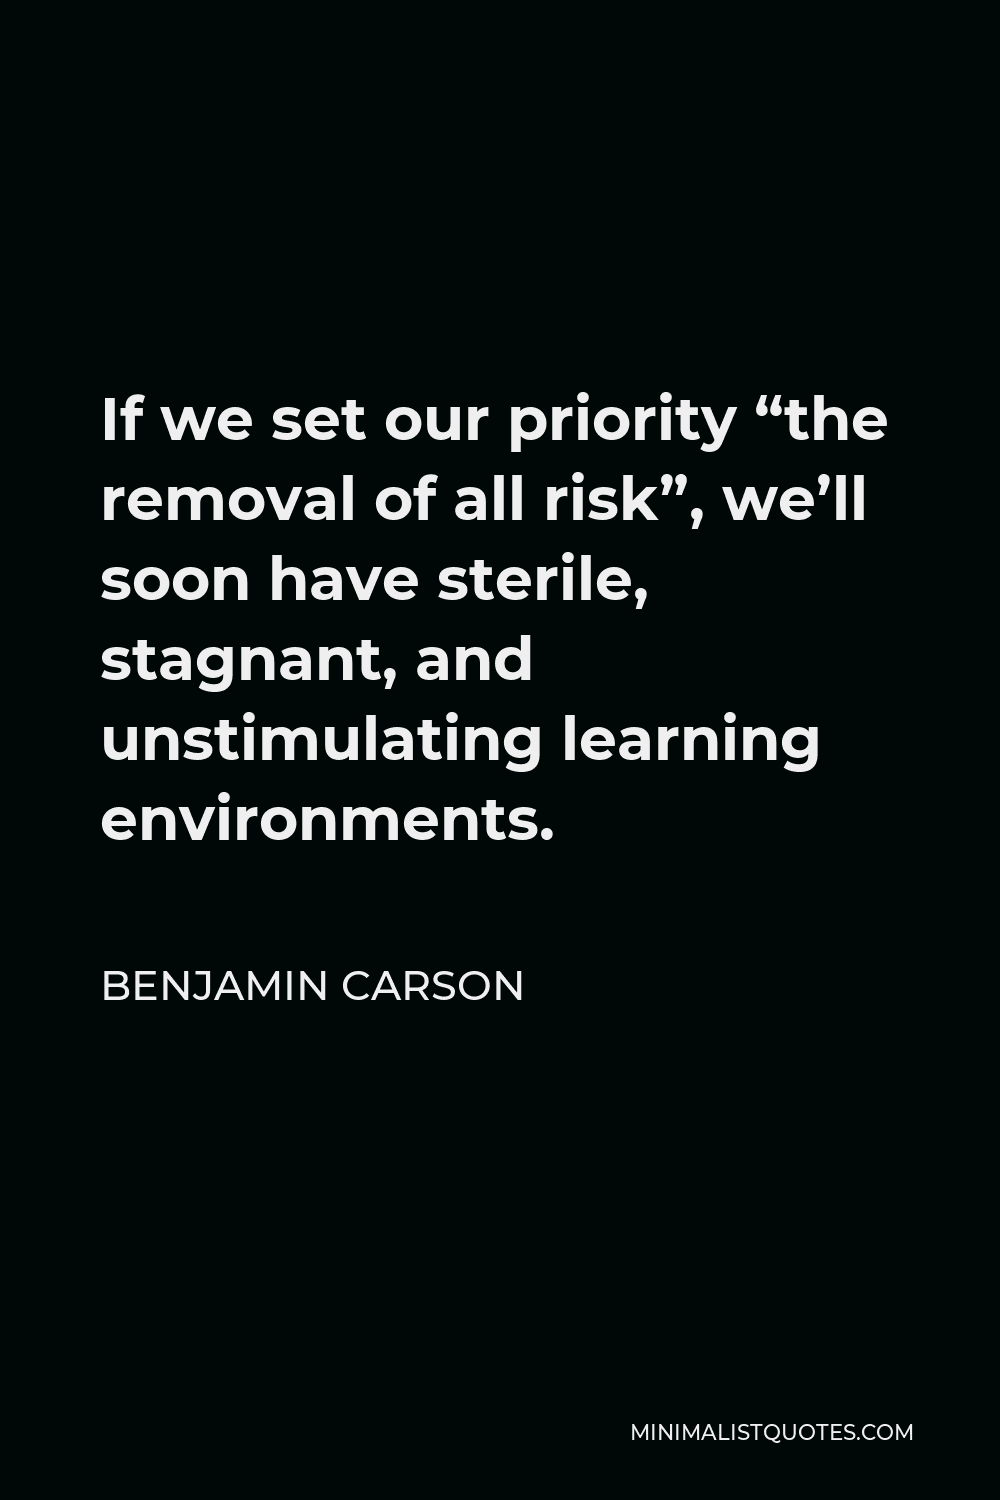 Benjamin Carson Quote - If we set our priority “the removal of all risk”, we’ll soon have sterile, stagnant, and unstimulating learning environments.